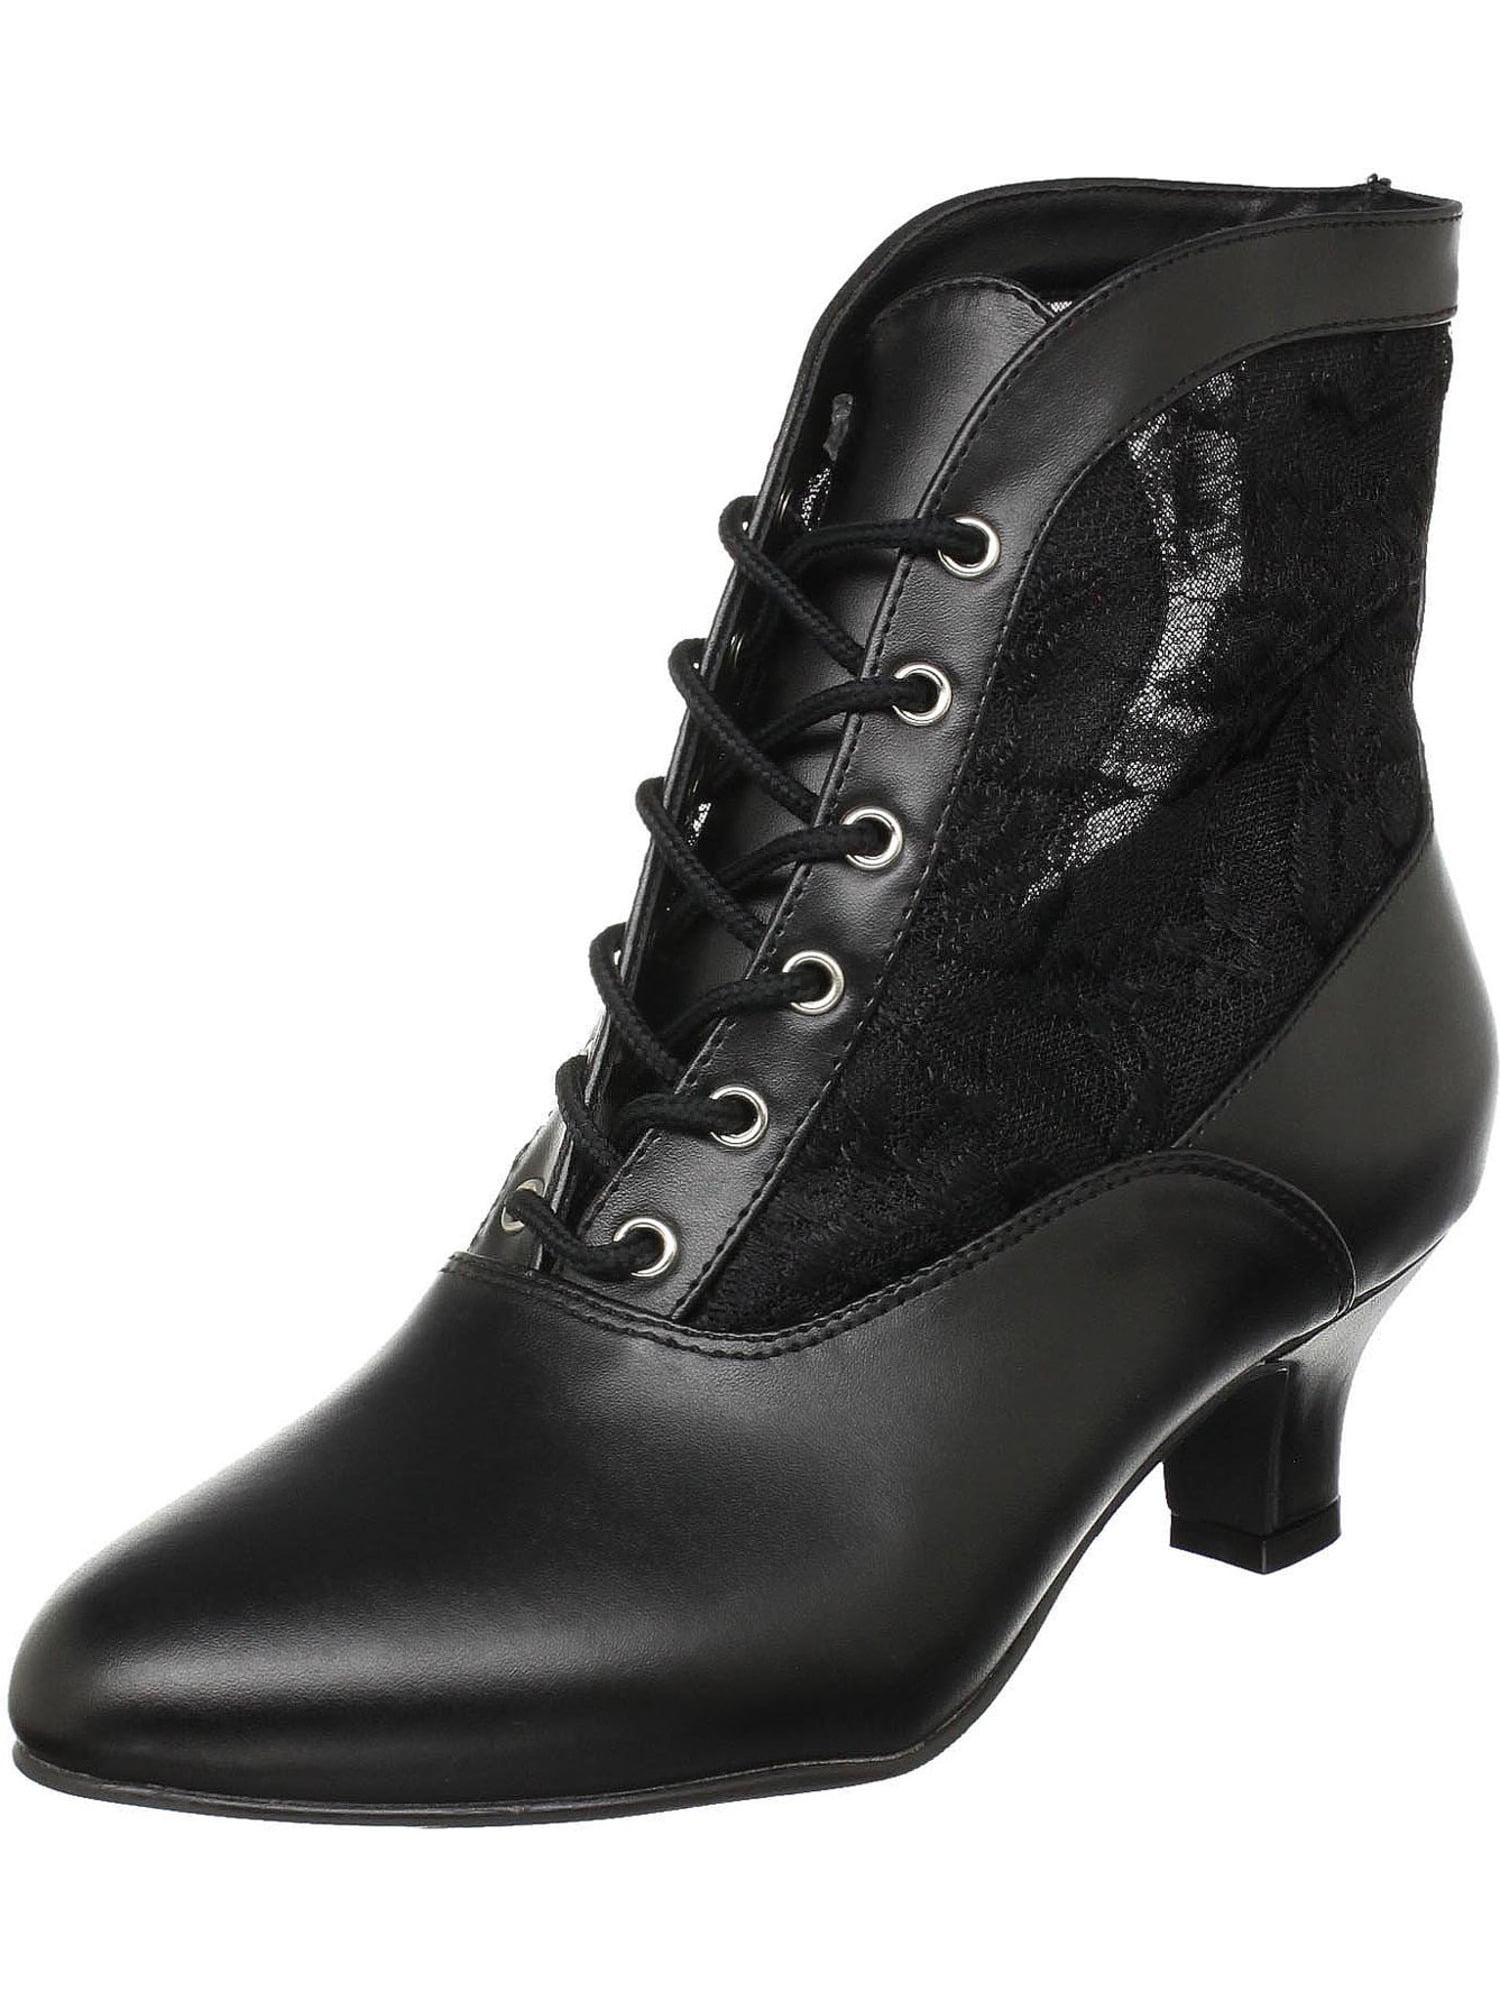 2 inch black ankle boots